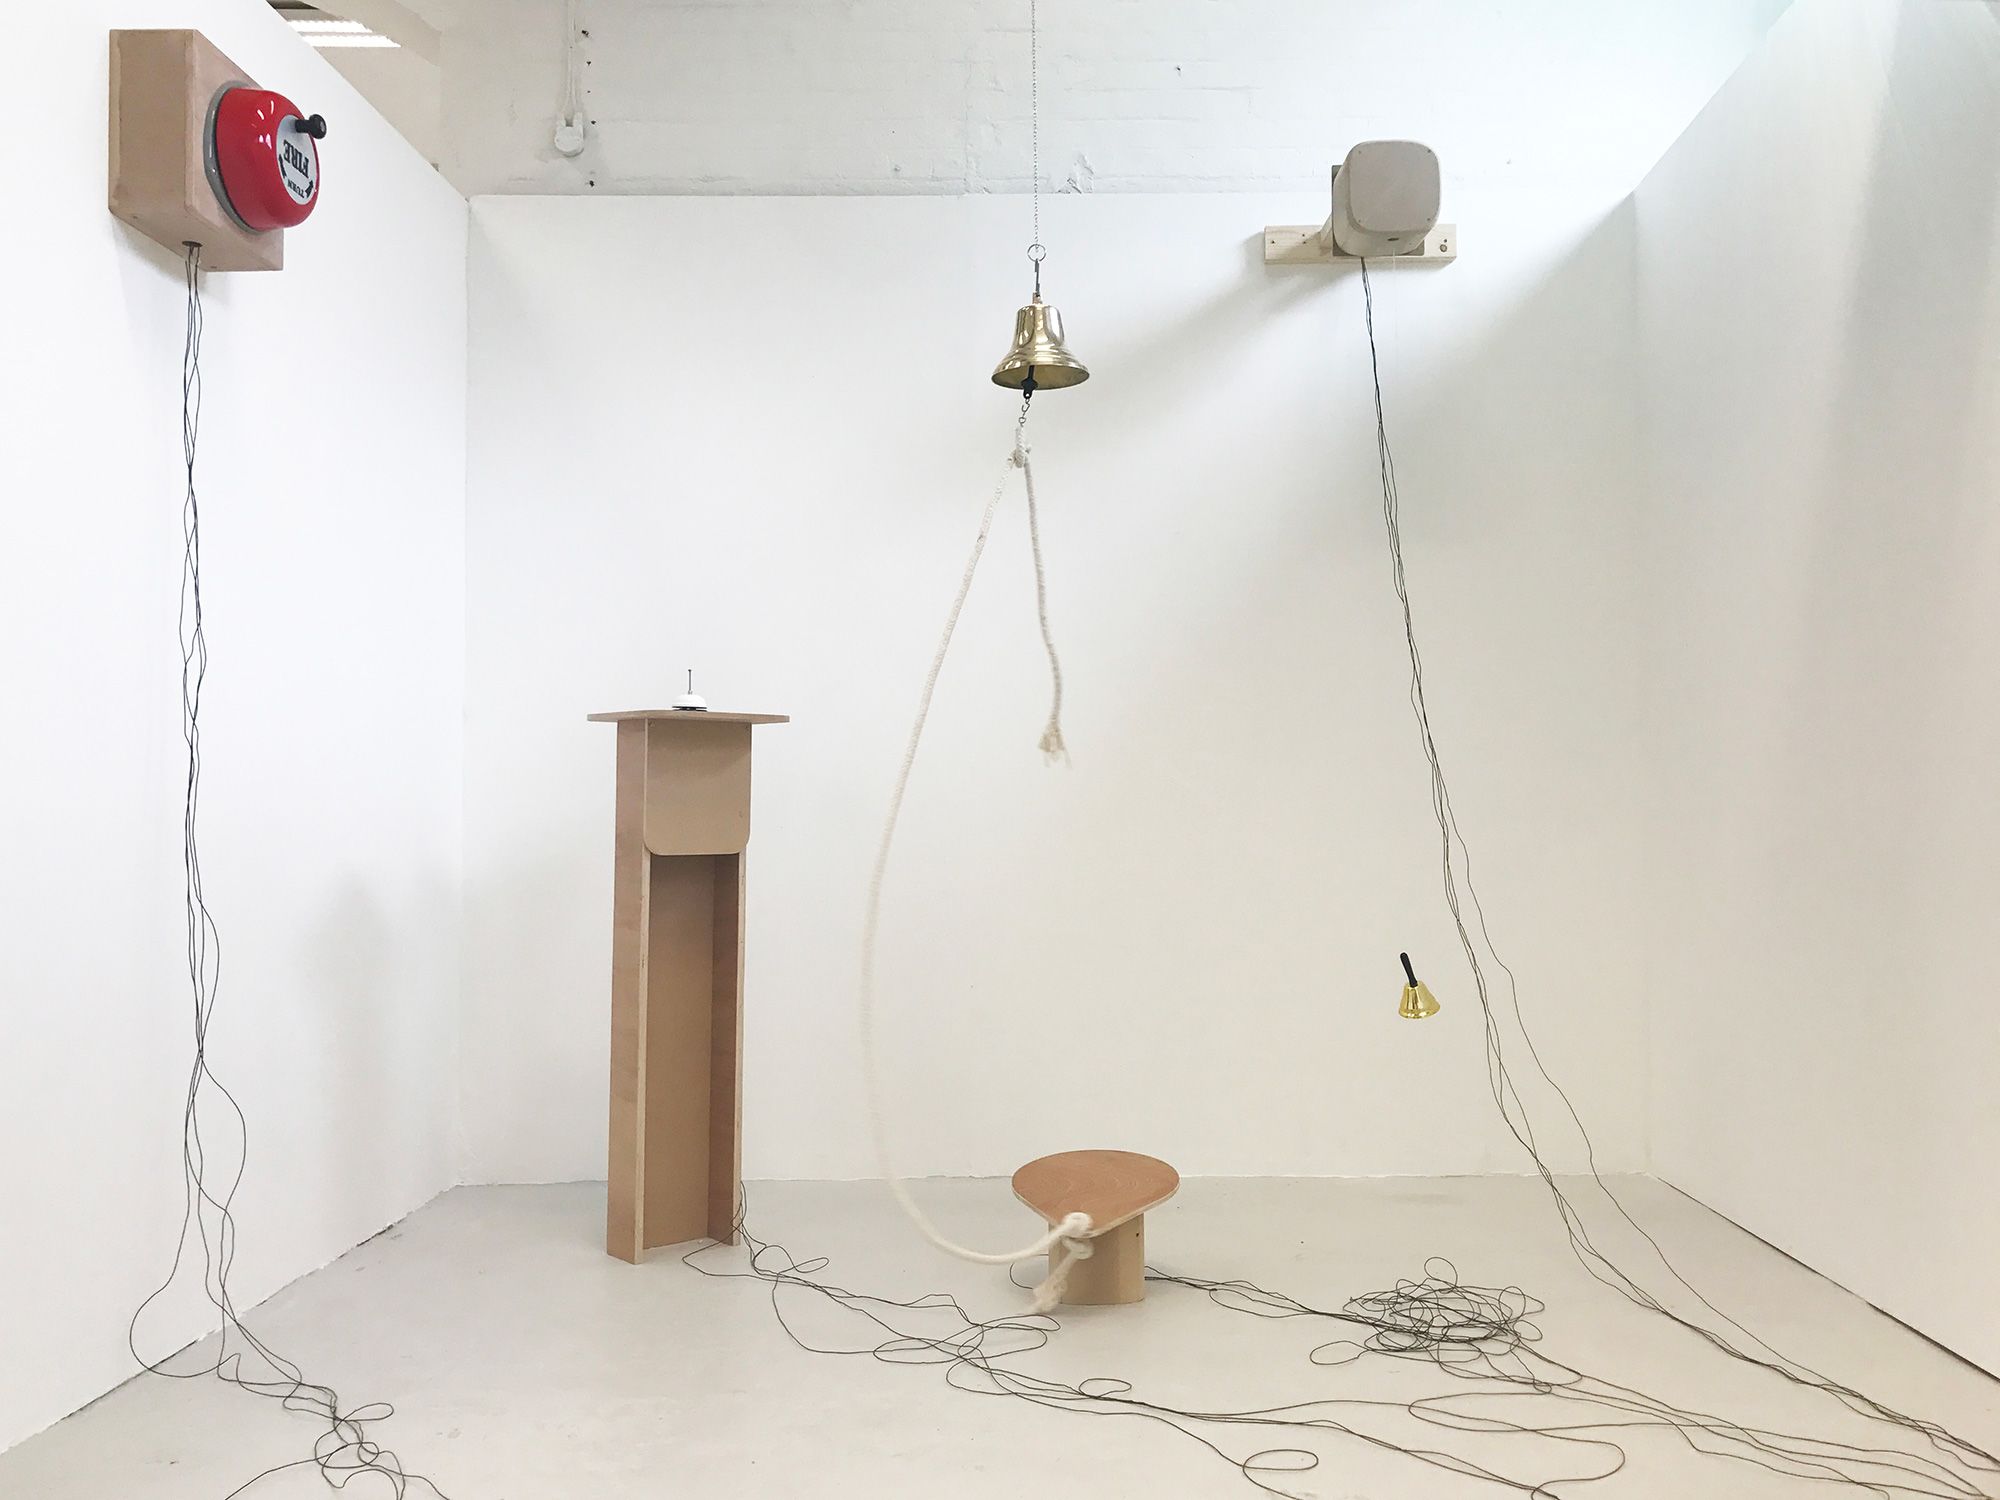 Degree Show 2017 installation, a selection of different type of bells attached to the white wall or presented on a plinth. Wires are connected to each bell.